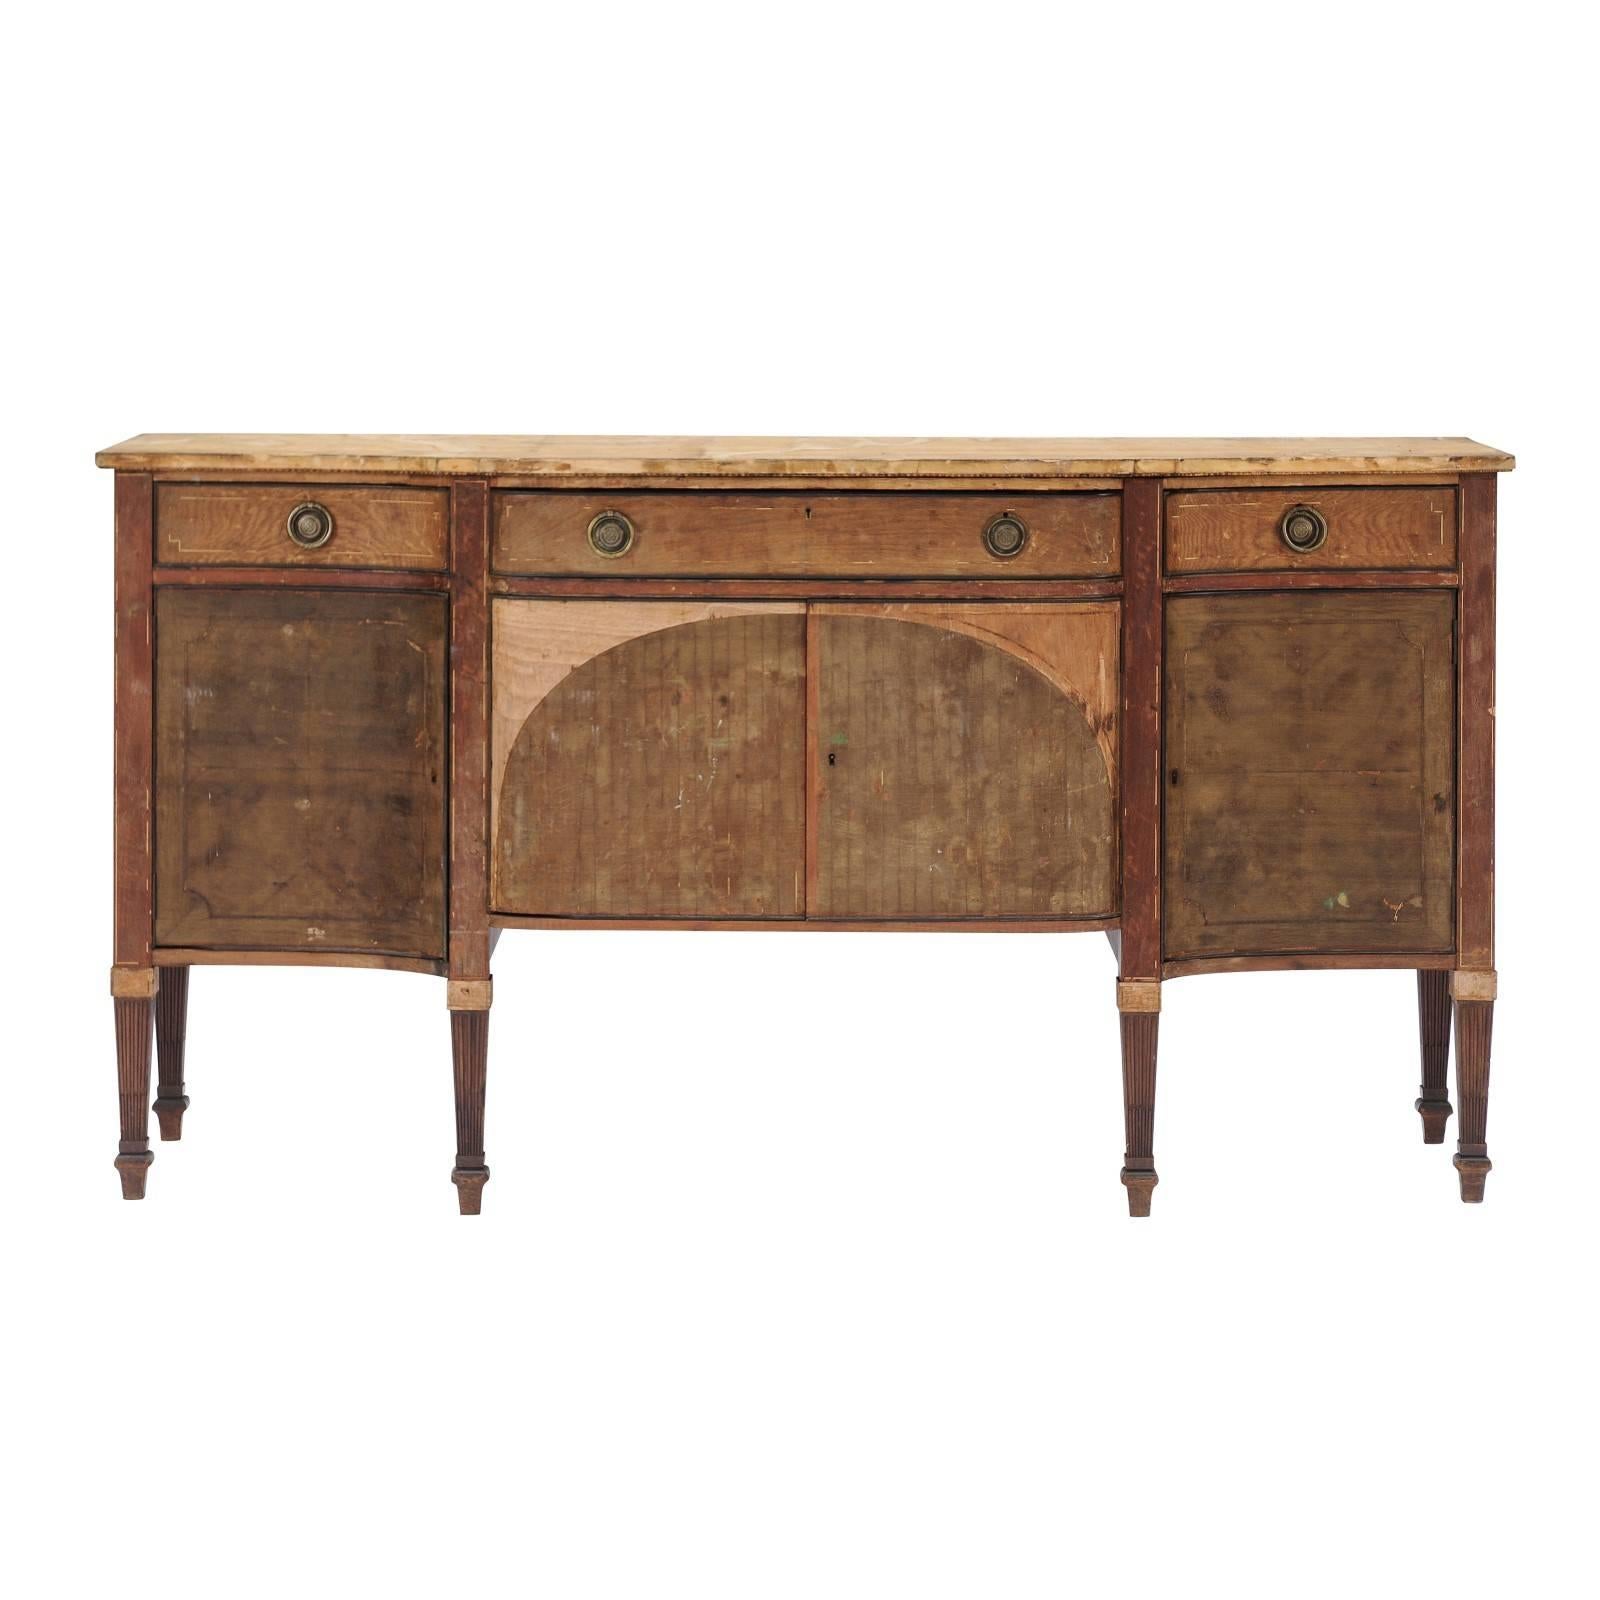 French, 1920s, Neoclassical Style Serpentine Front Sideboard with Stripped Wood